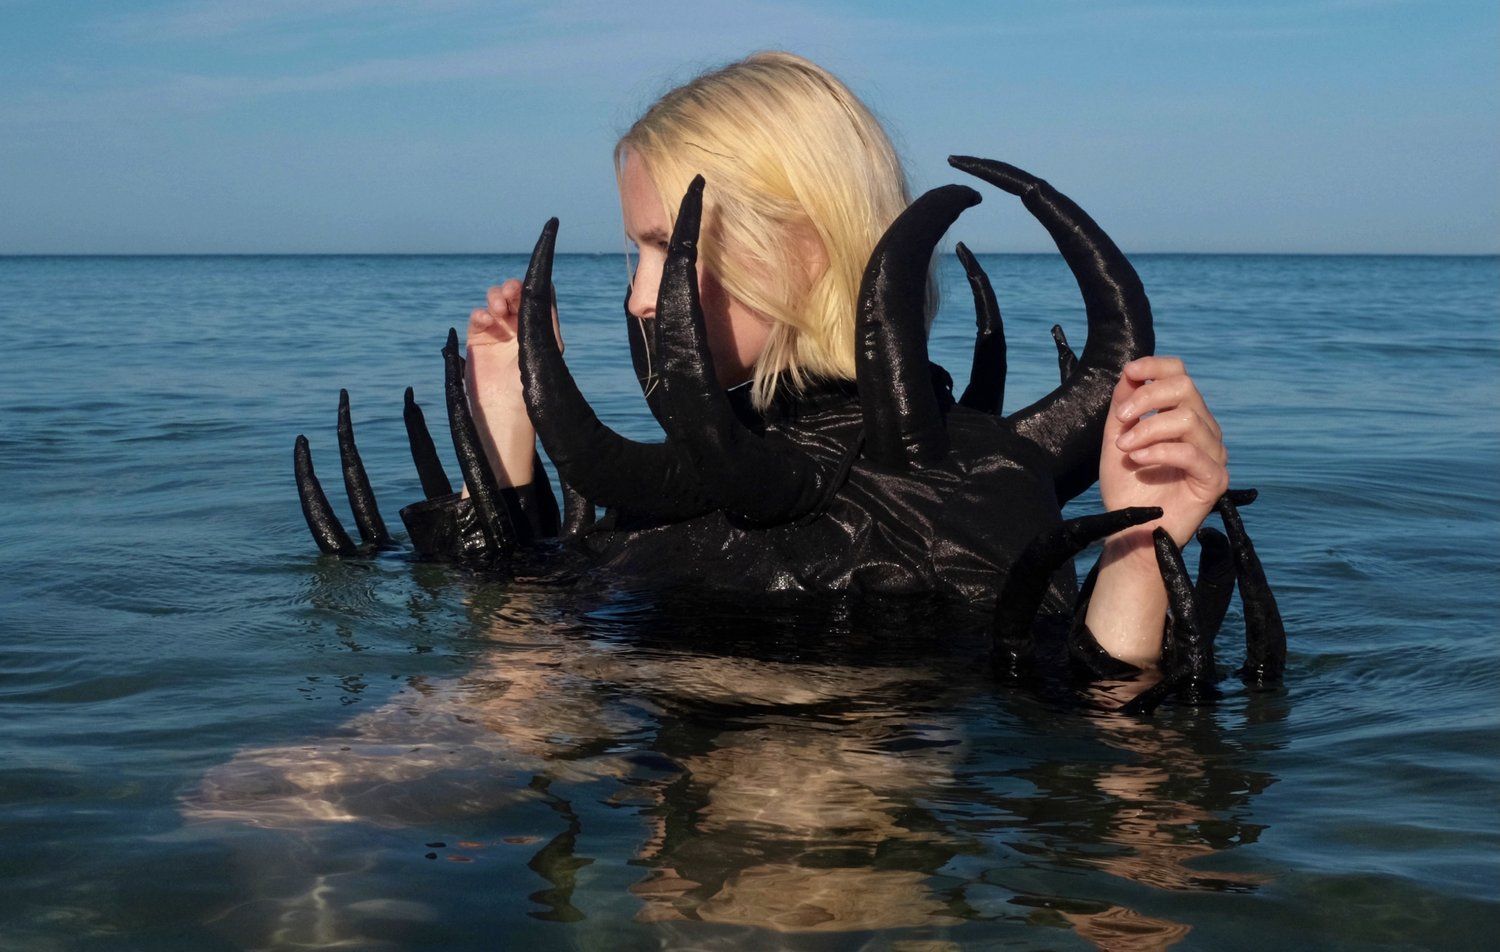 Designed her own universe: Livia Rita as the Black Spike Creature. Picture by Toma